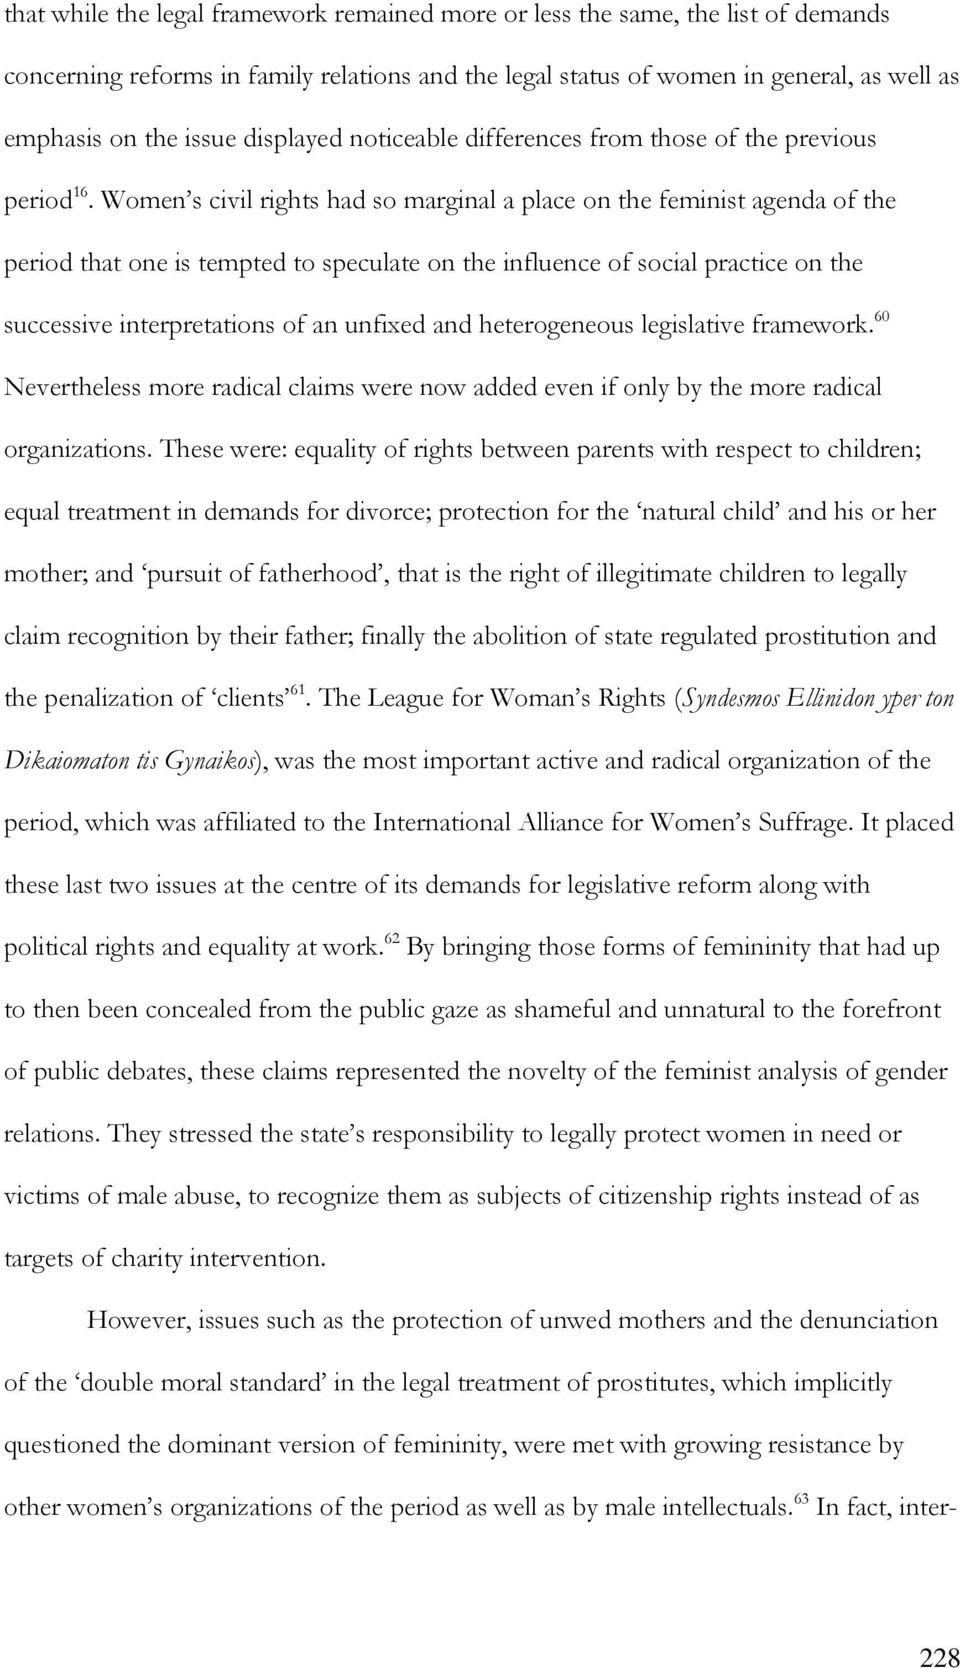 Women s civil rights had so marginal a place on the feminist agenda of the period that one is tempted to speculate on the influence of social practice on the successive interpretations of an unfixed